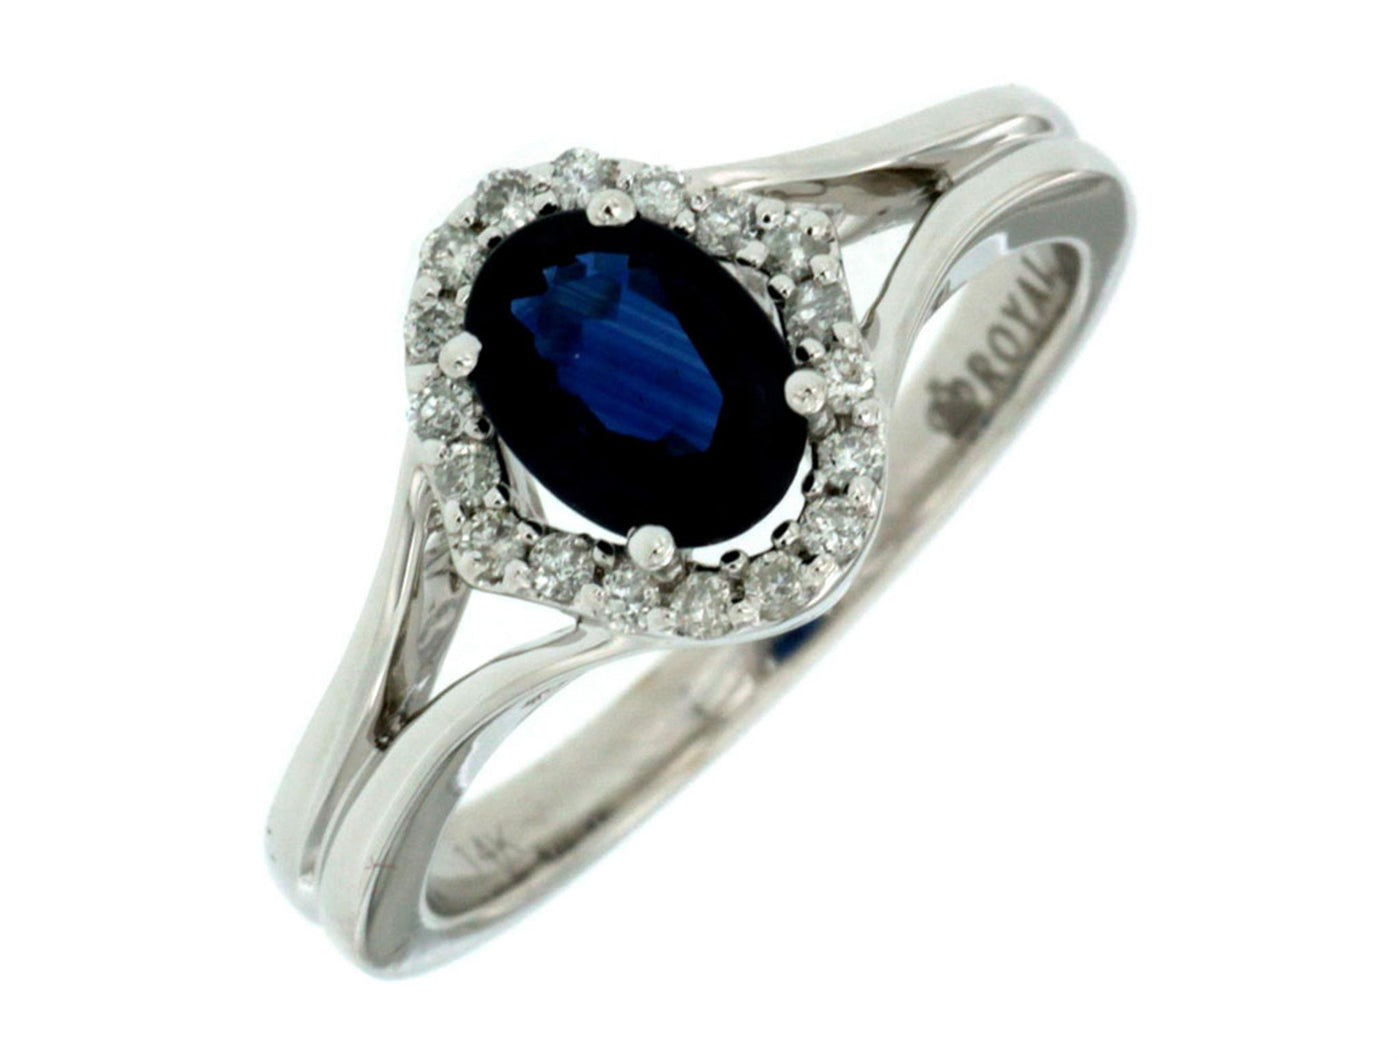 14K White Gold 1.15ctw Halo Style Sapphire and Diamonds Ring